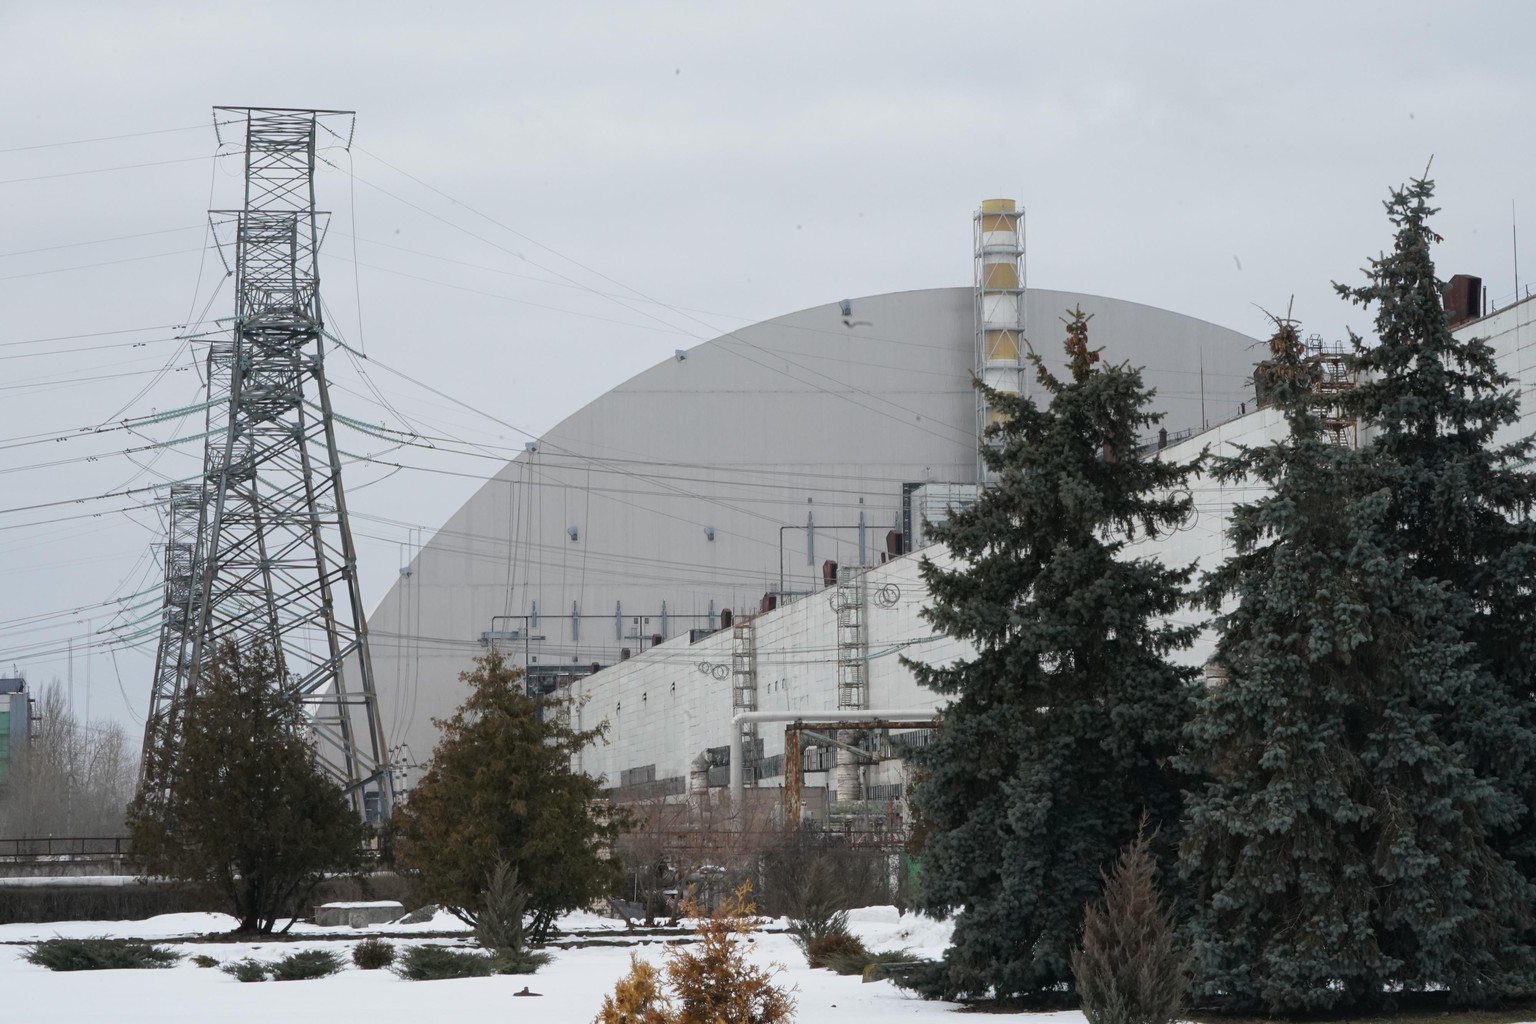 February 6, 2022, Pripyat, Chernobyl Exclusion Zone, Ukraine: Safe Confinement cover at Chernobyl Nuclear Power Plant over the damaged reactor on February 6, 2022 in Ukraine. Russian continues its mil ...